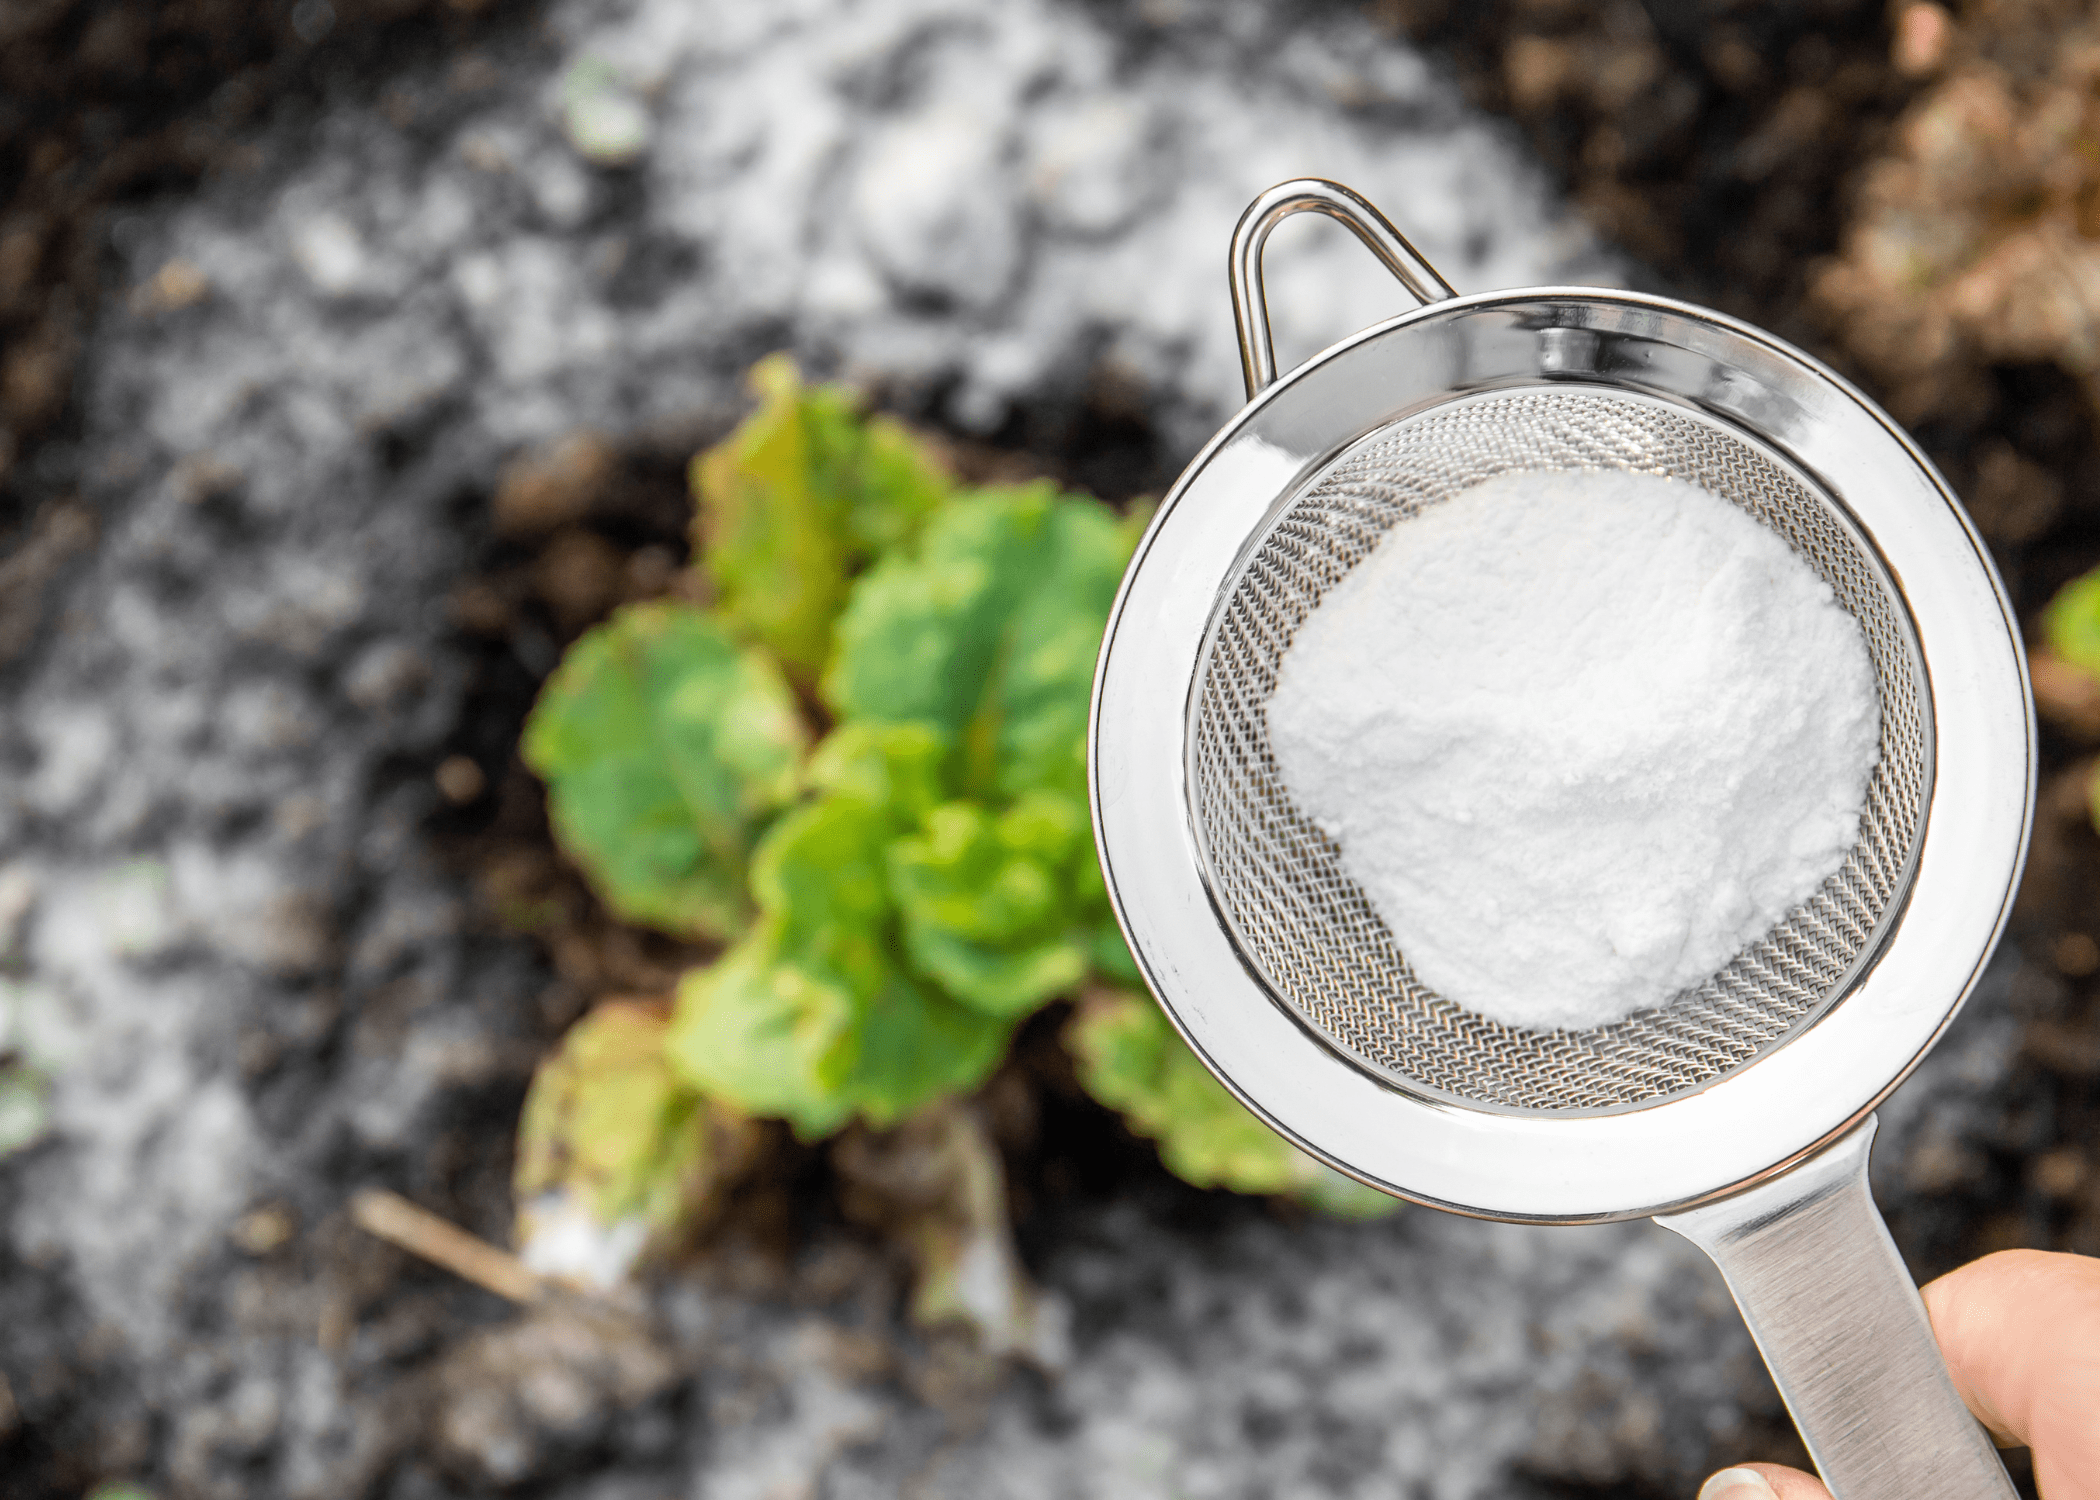 baking soda in a sifter over top of weeds